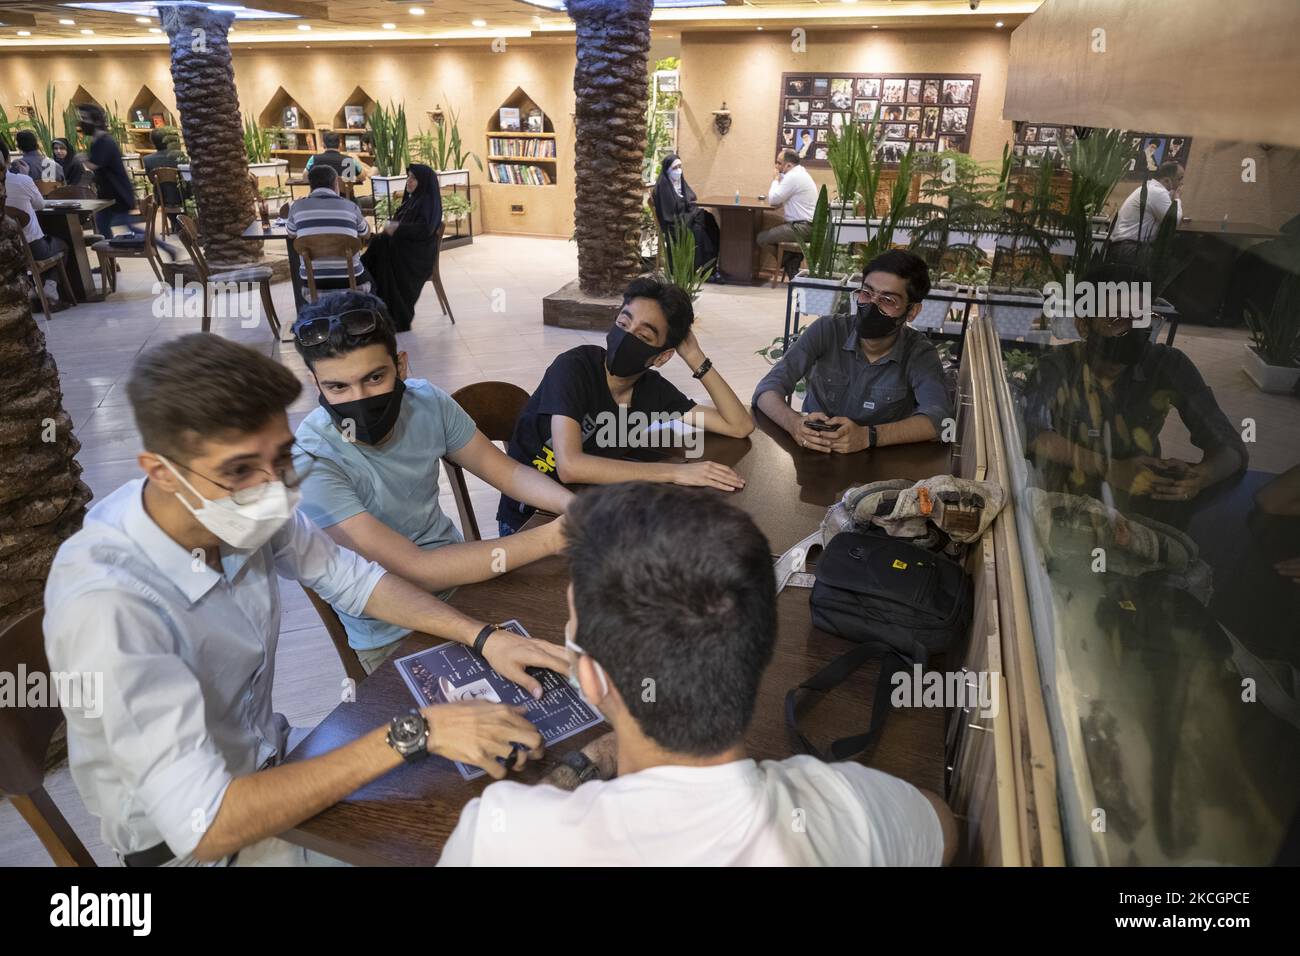 Iranian youths sit together at the Nakhlestan cafe in downtown Tehran, on July 1, 2021. Nakhlestan cafe (Palm Farm) has been organized and owned by the Owj, Islamic Revolutionary Guard Corps's (IRGS) Arts and Media Organization, that is located in downtown Tehran, Palm is the main symbol of the Iran-Iraq war (1980-88) martyrs. (Photo by Morteza Nikoubazl/NurPhoto) Stock Photo